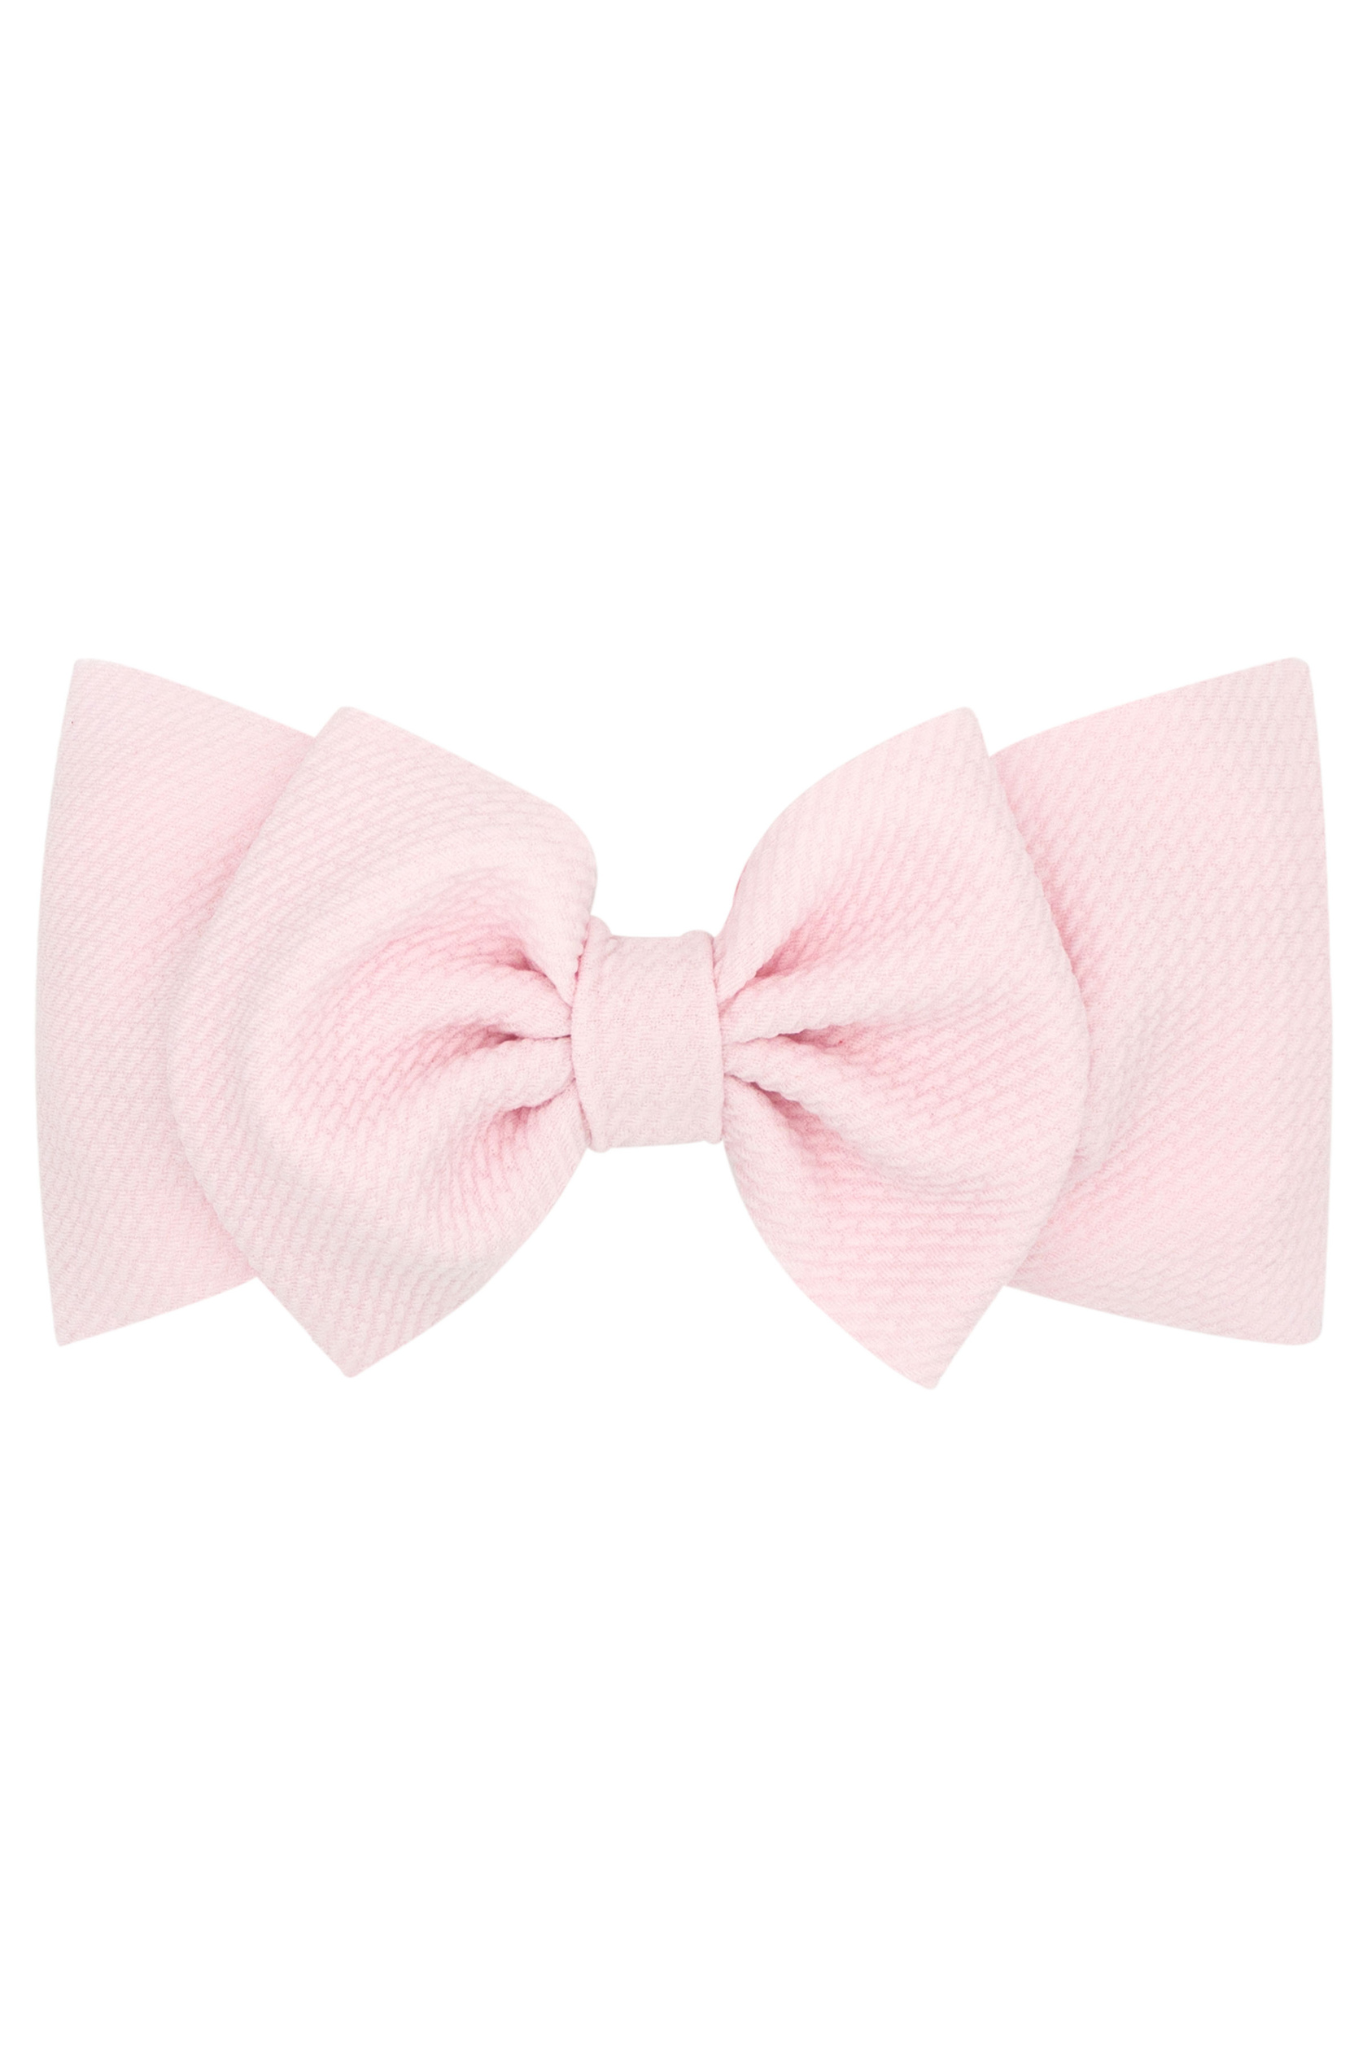 Soft Pink Rippled Large Bowtie on Matching Wide Band